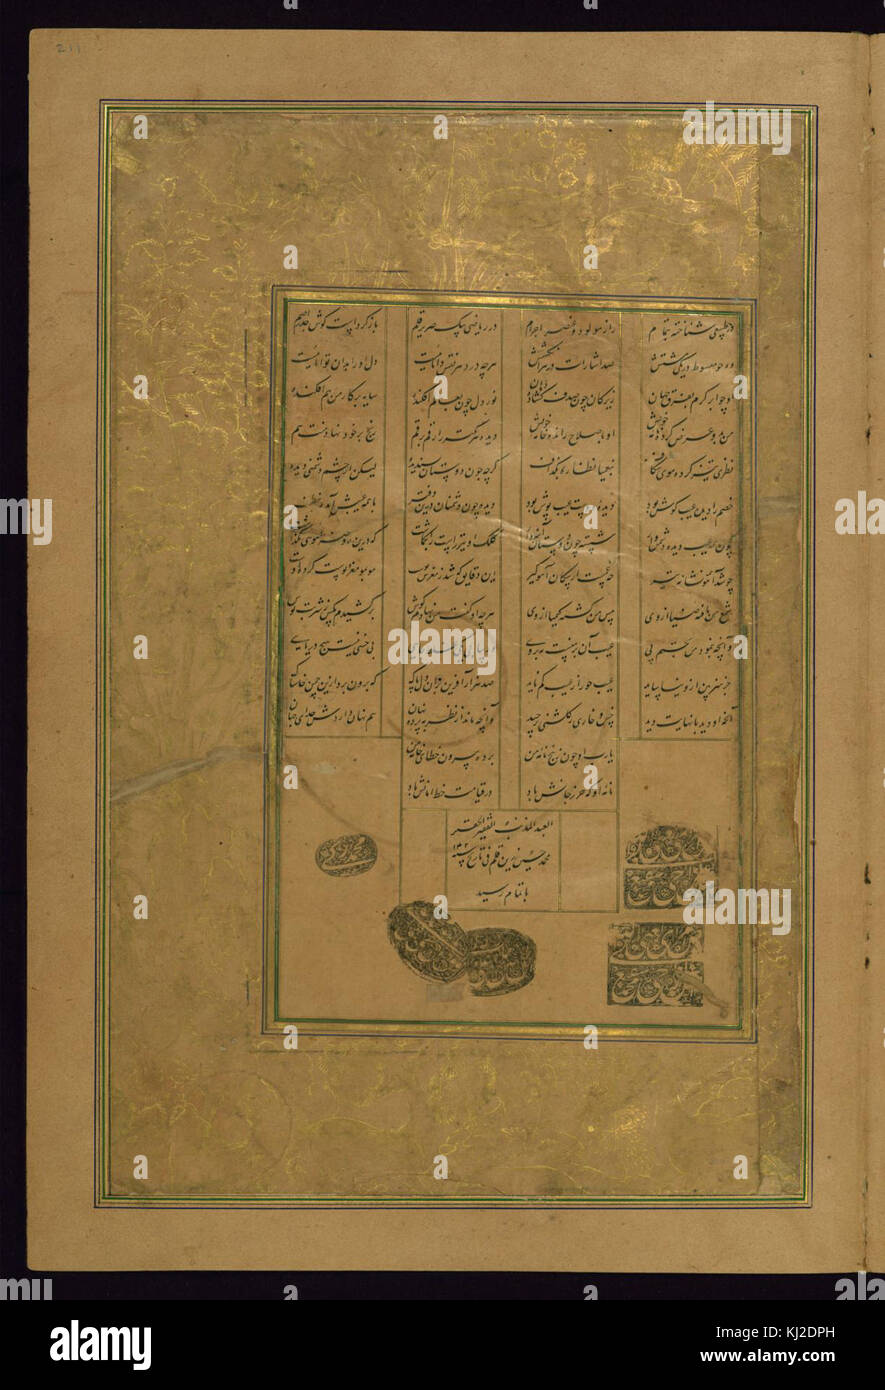 Amir Khusraw Dihlavi - Colophon - Walters W624211A - Full Page Stock Photo